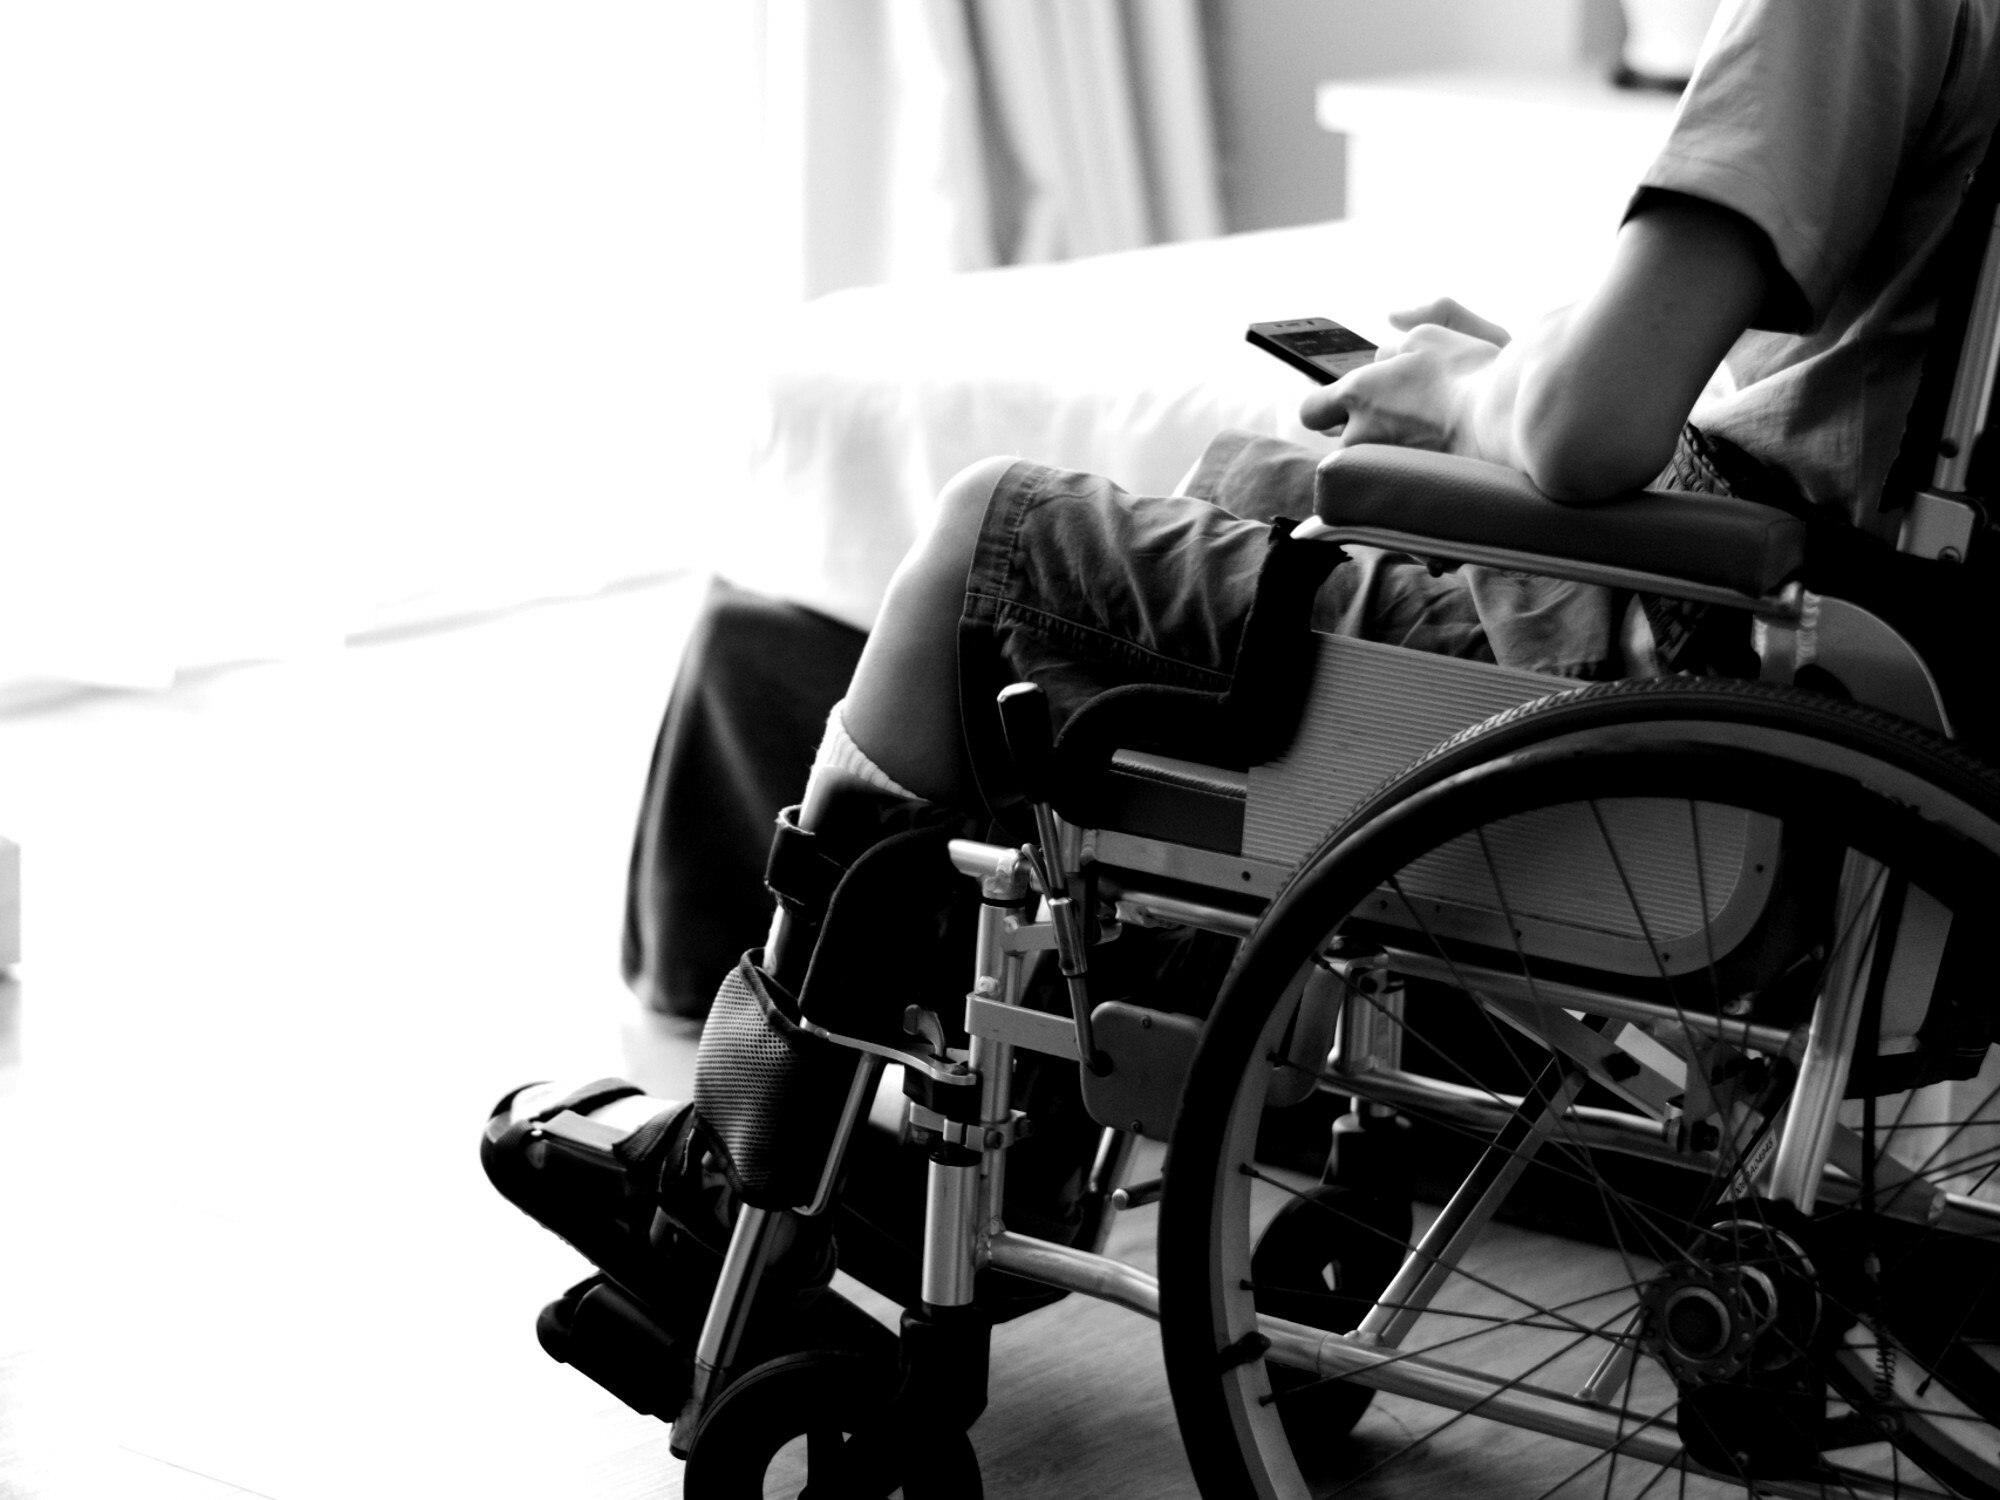 <p>In some cases unavailable support has left people who use wheelchairs sleeping in them overnight because there is no help to get them into their bed. [Source: Shutterstock]</p>
